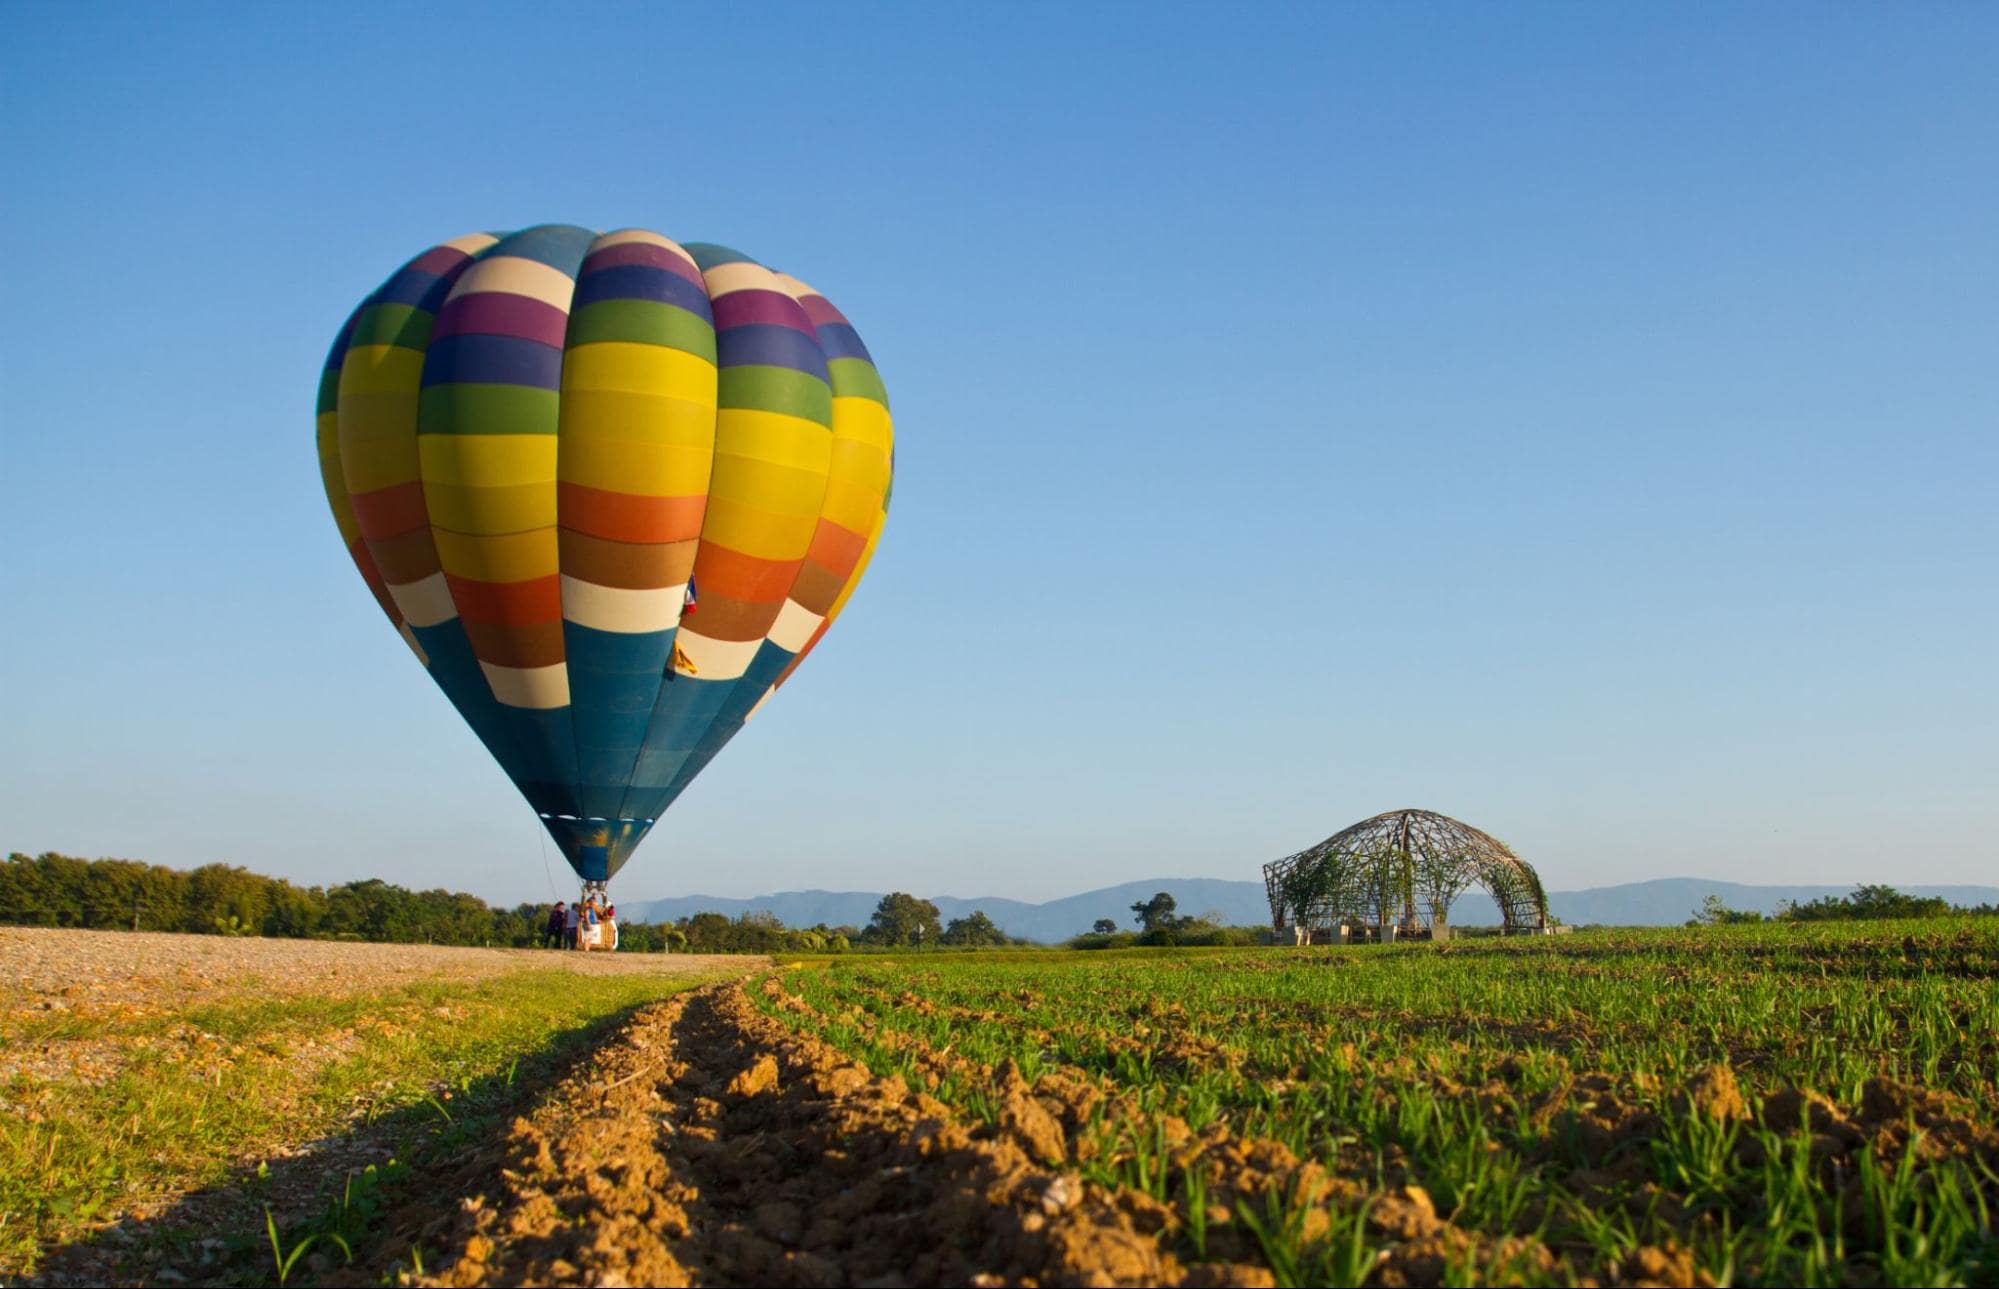 Hot air balloon in field—adventurous birthday gift experience for girlfriend